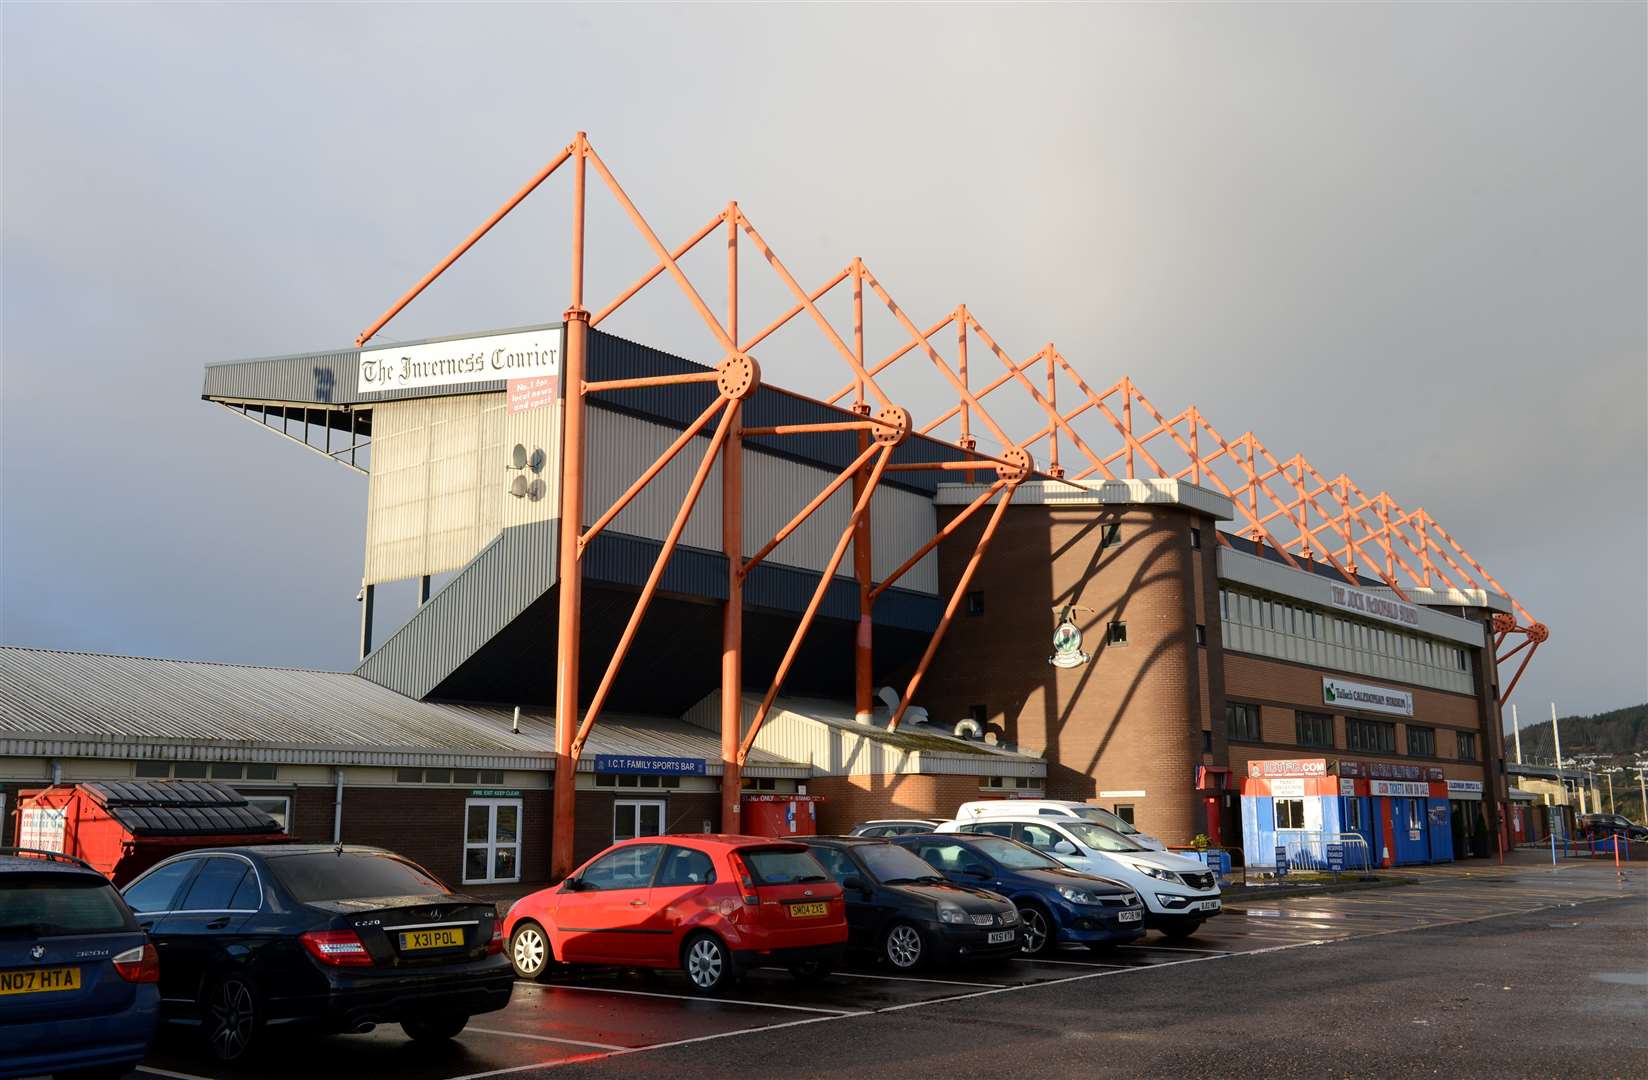 ICT's Caledonian Stadium, where the latest vandalism occurred and where the two teams met yesterday to discuss the issue.